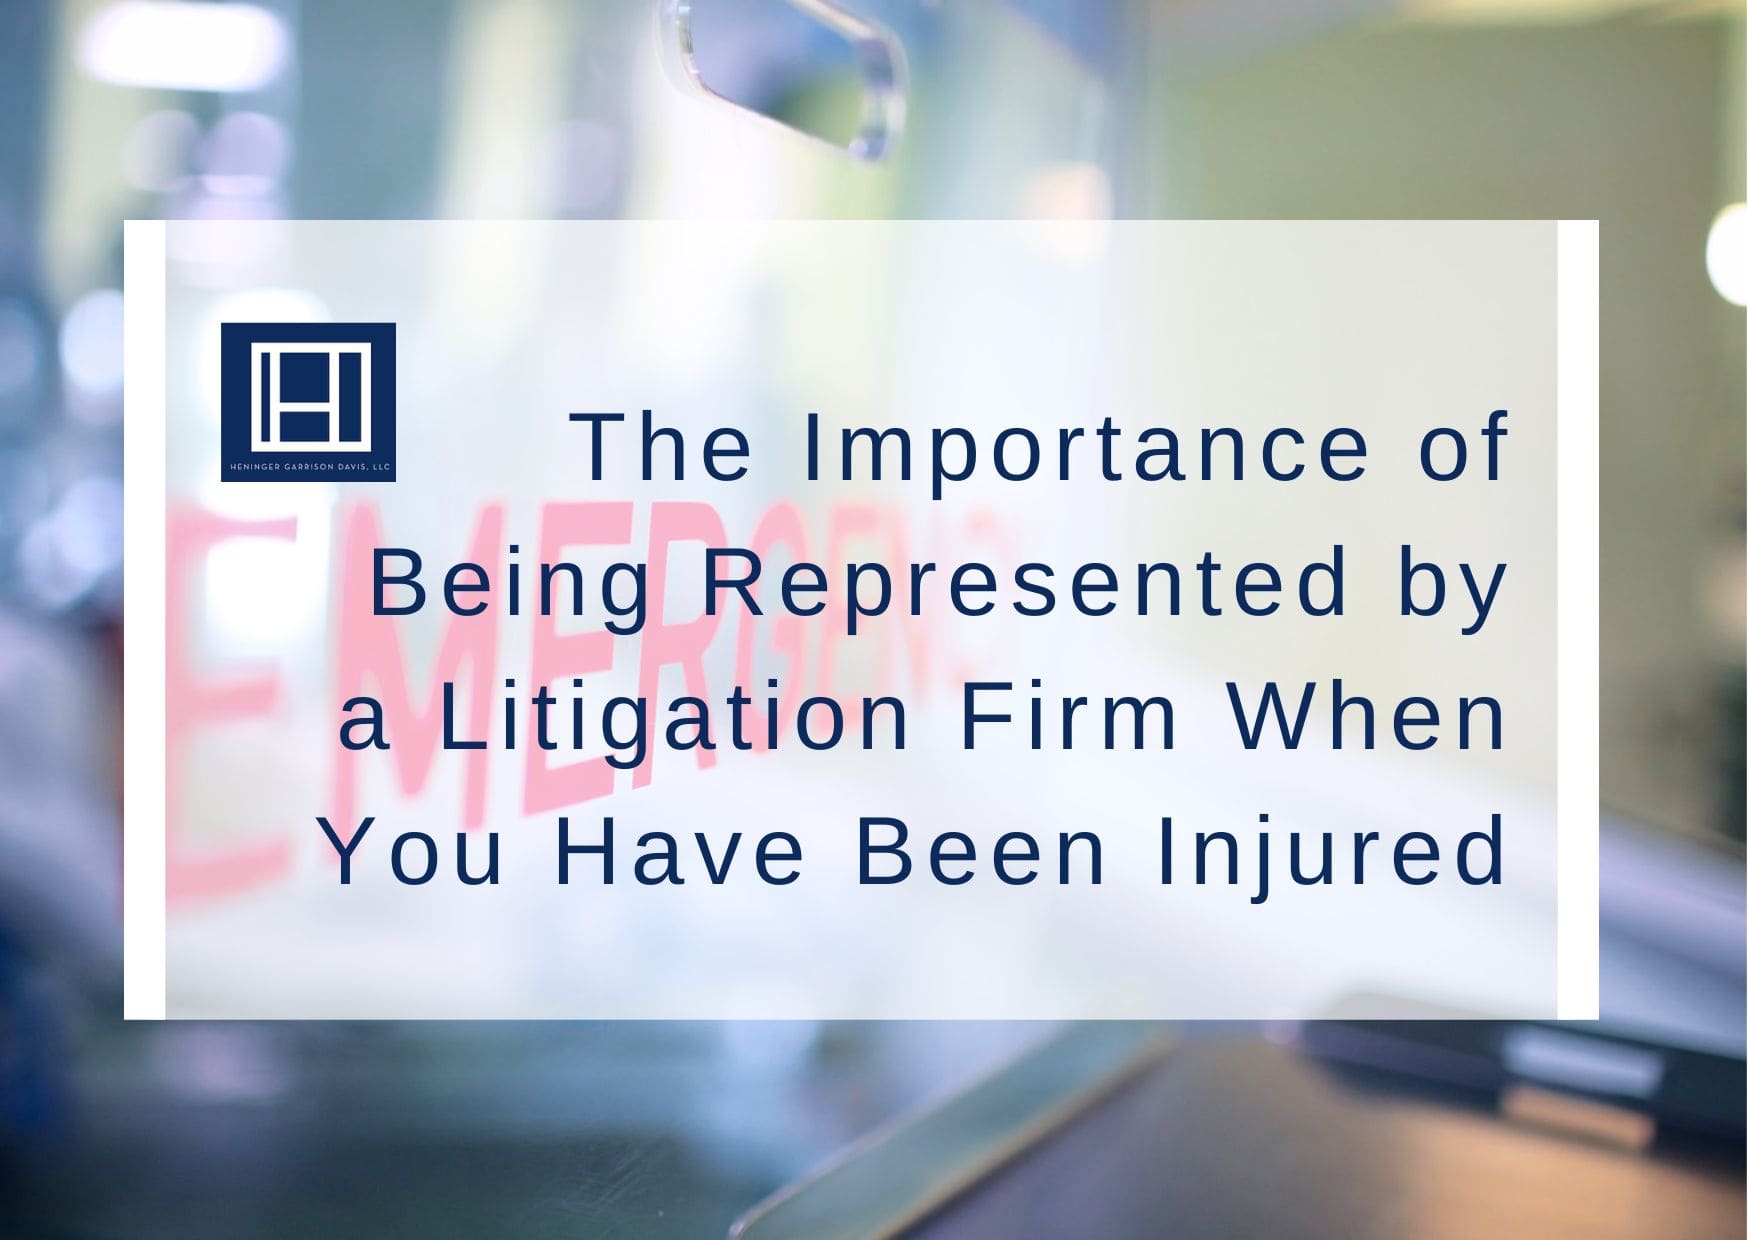 The Importance of Being Represented by a Litigation Firm When You Have Been Injured